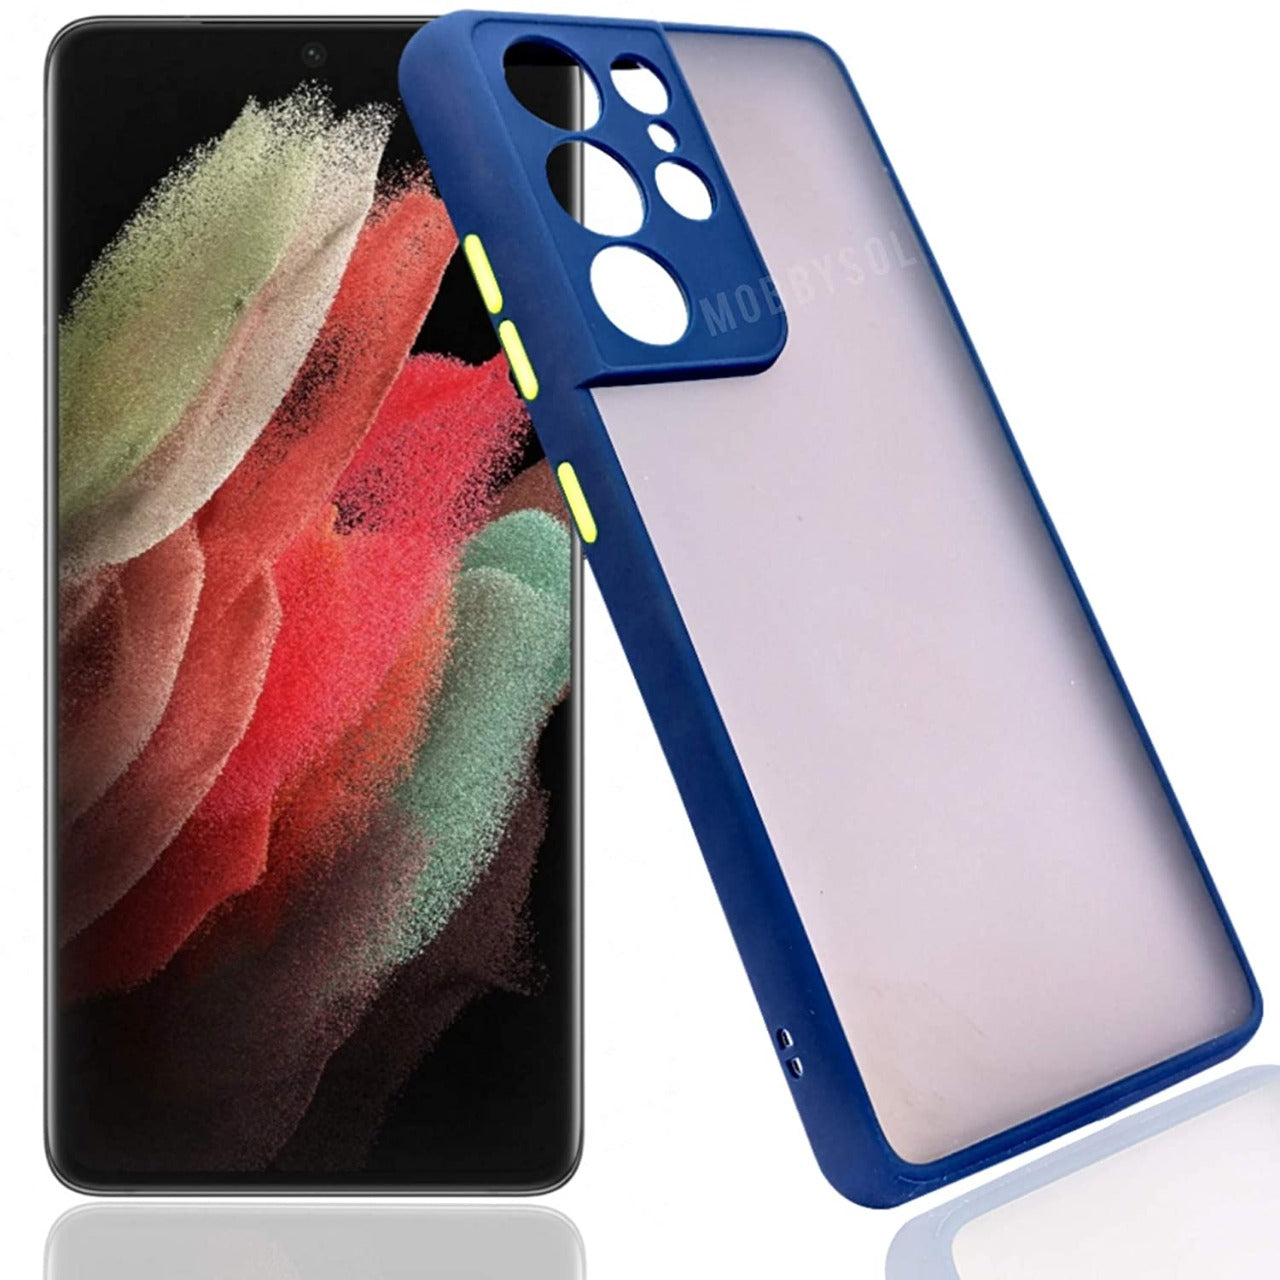 Samsung Note 20 Ultra Covers